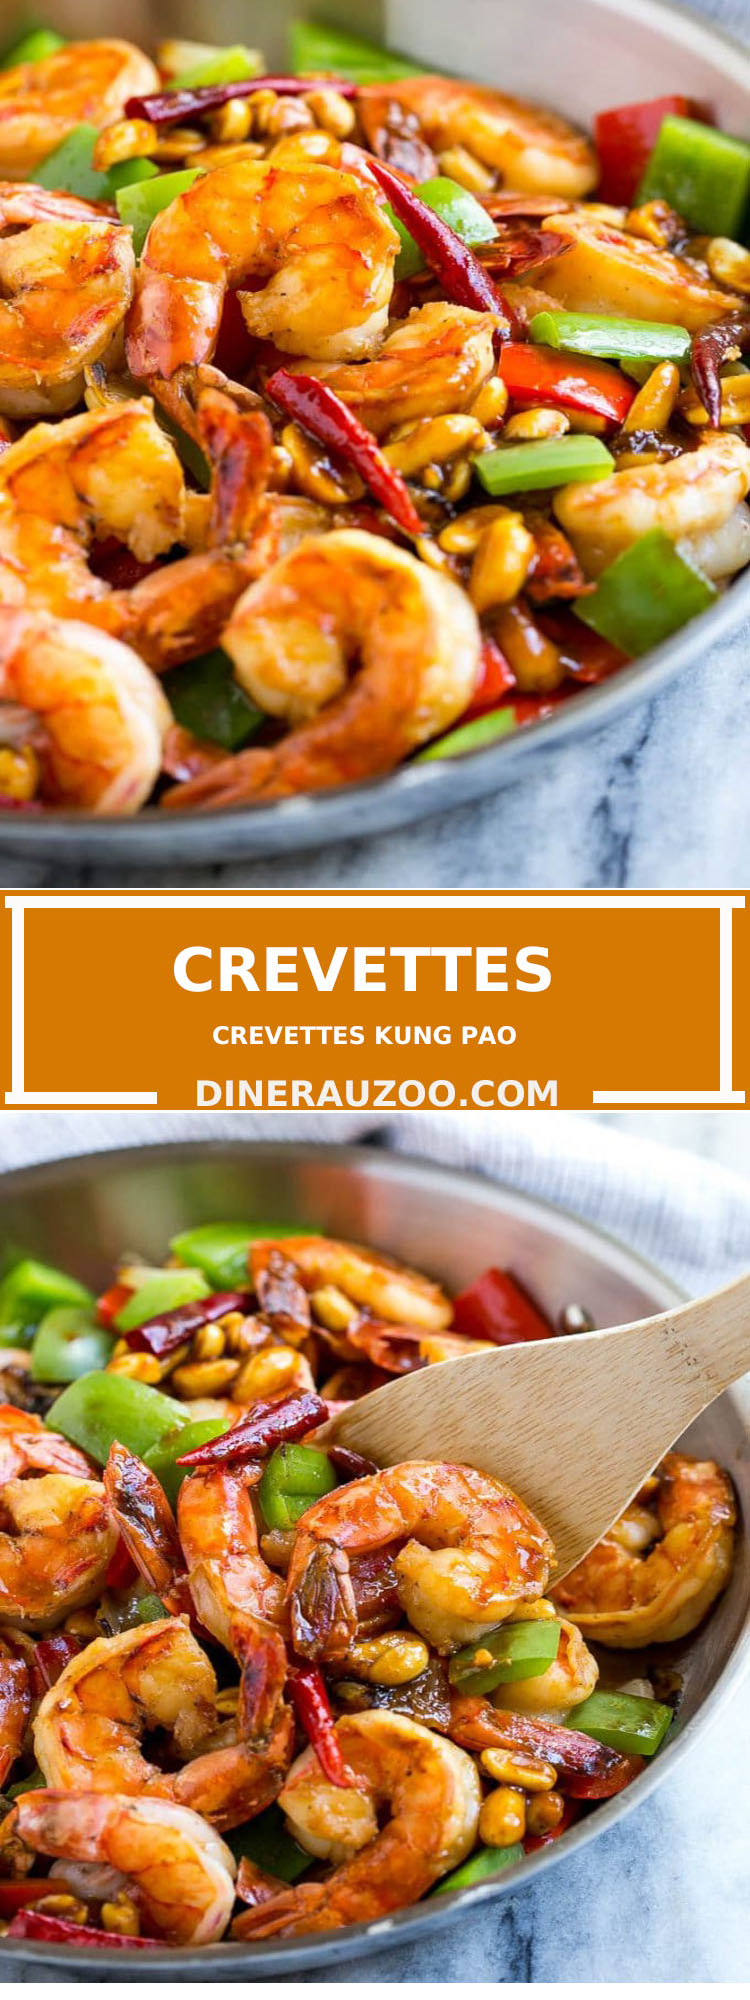 Crevettes Kung Pao1